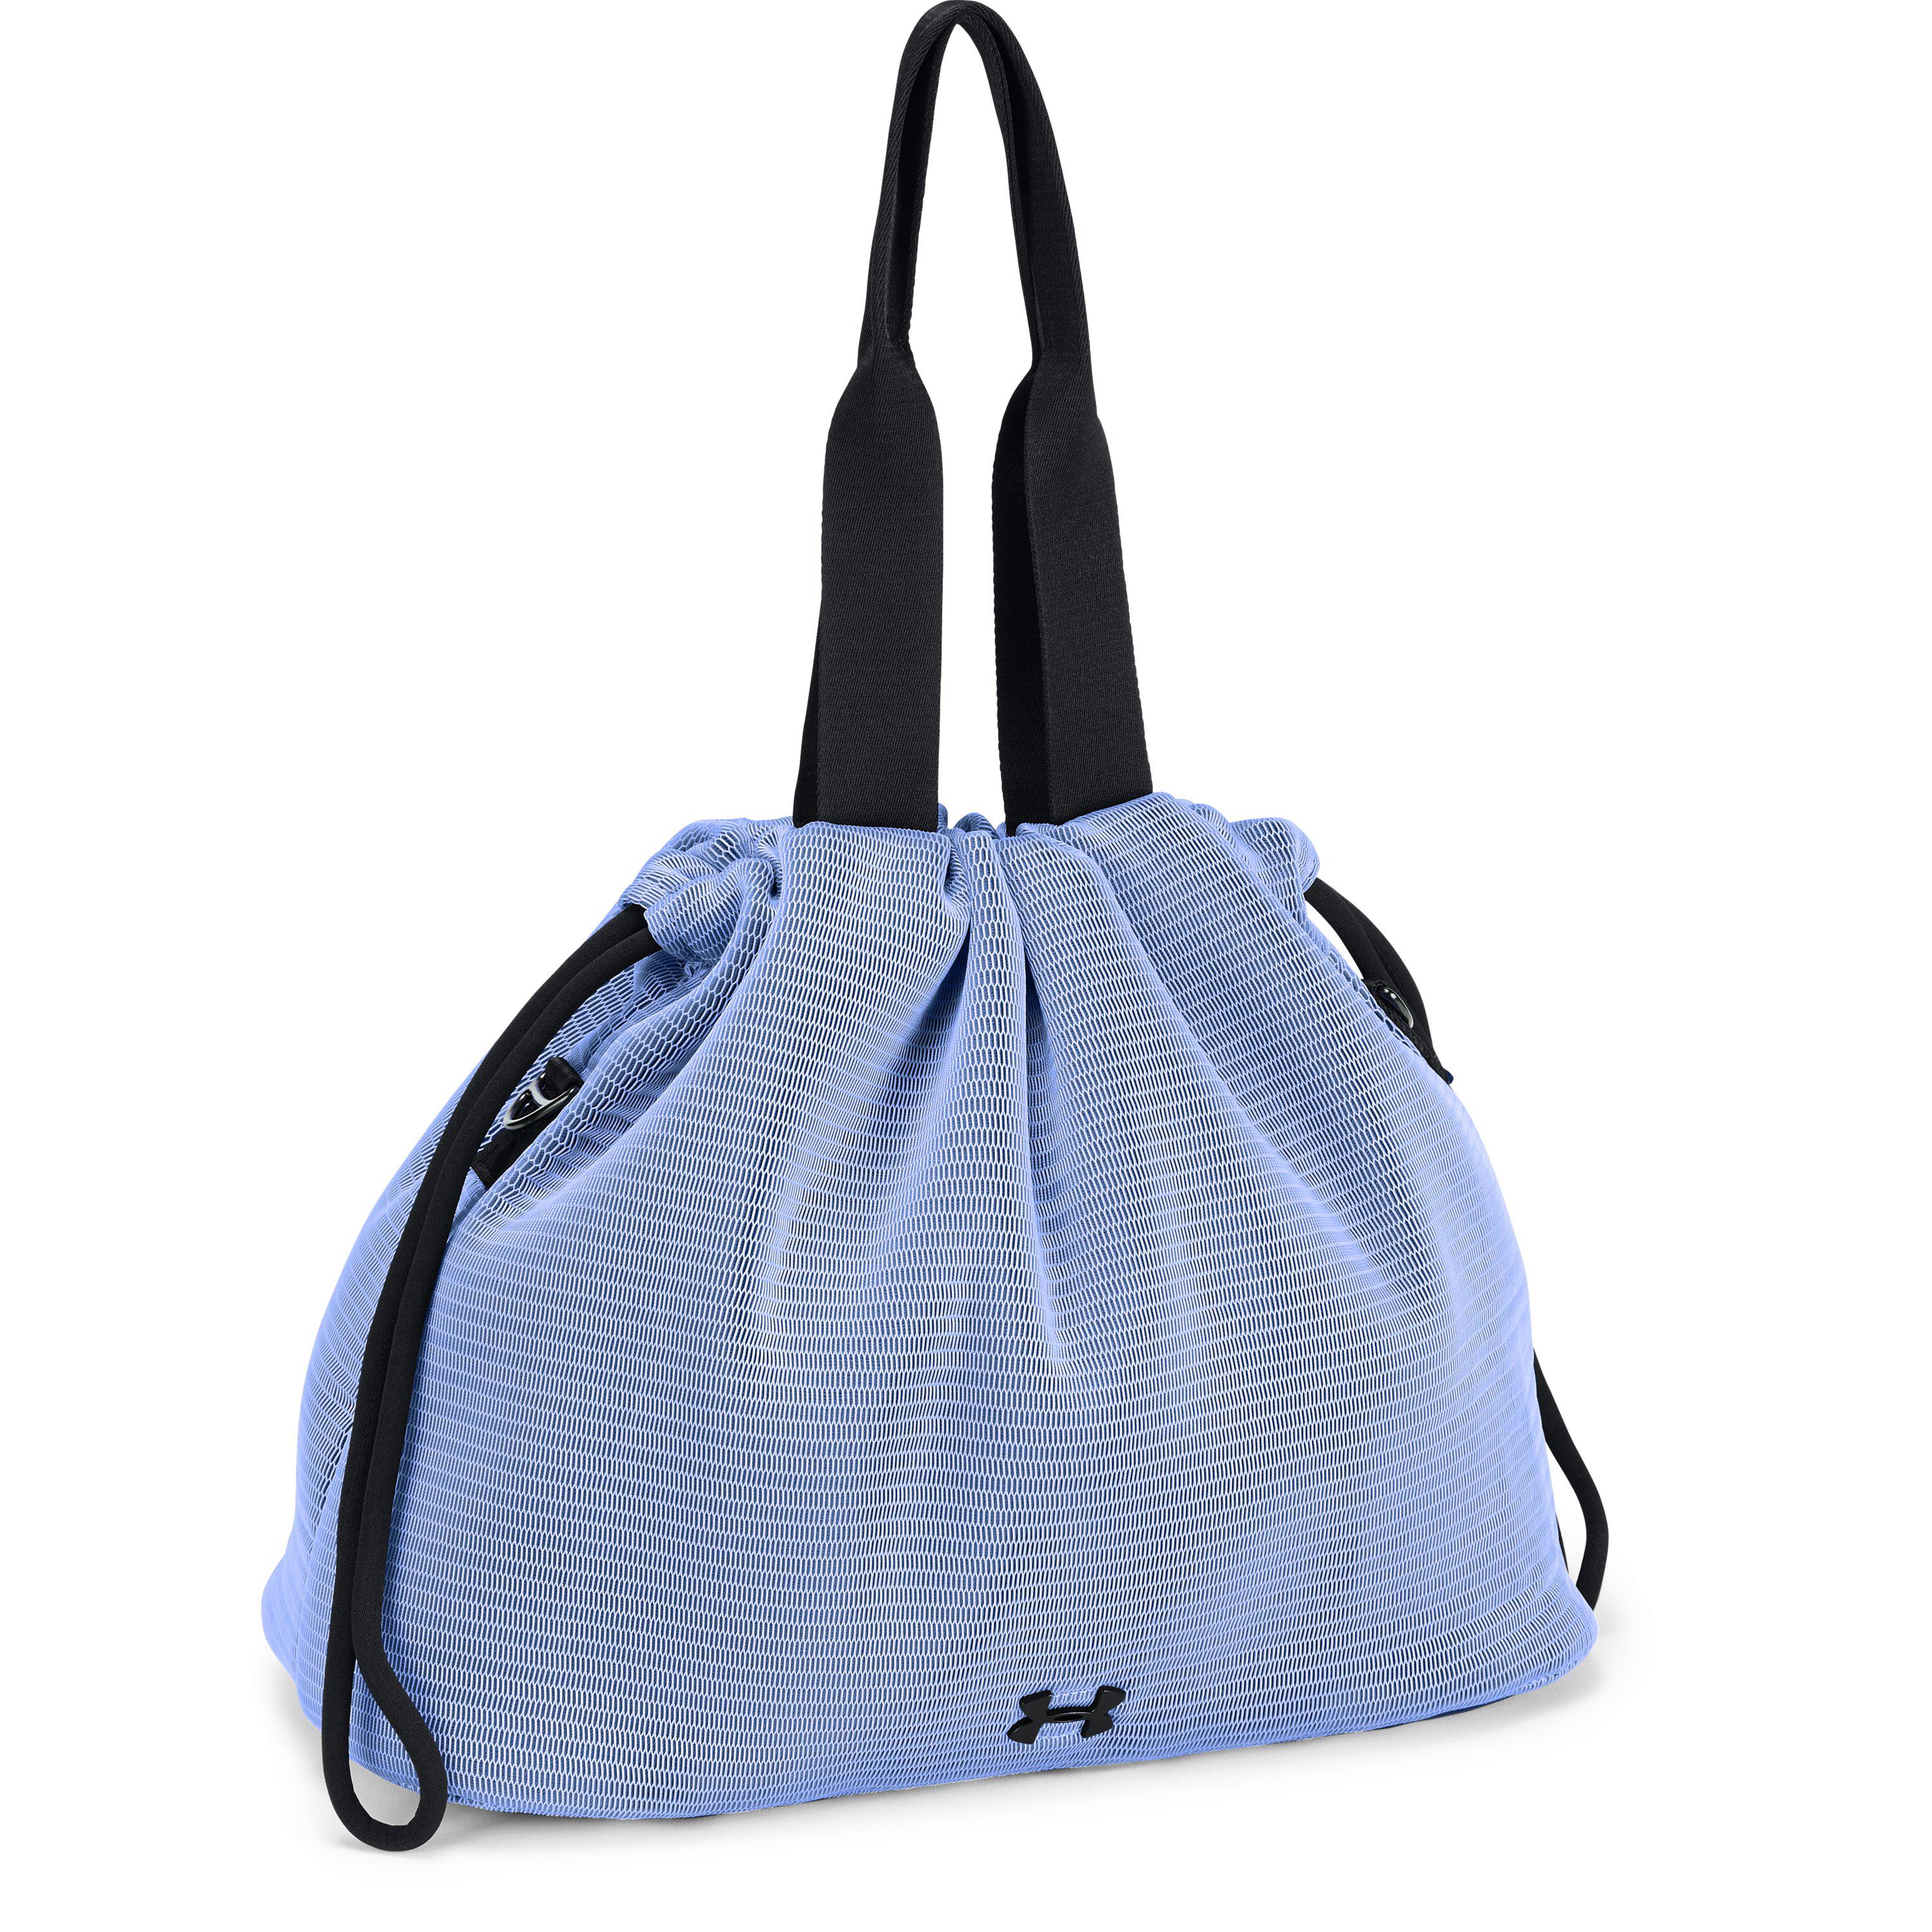 under armour women's cinch mesh tote